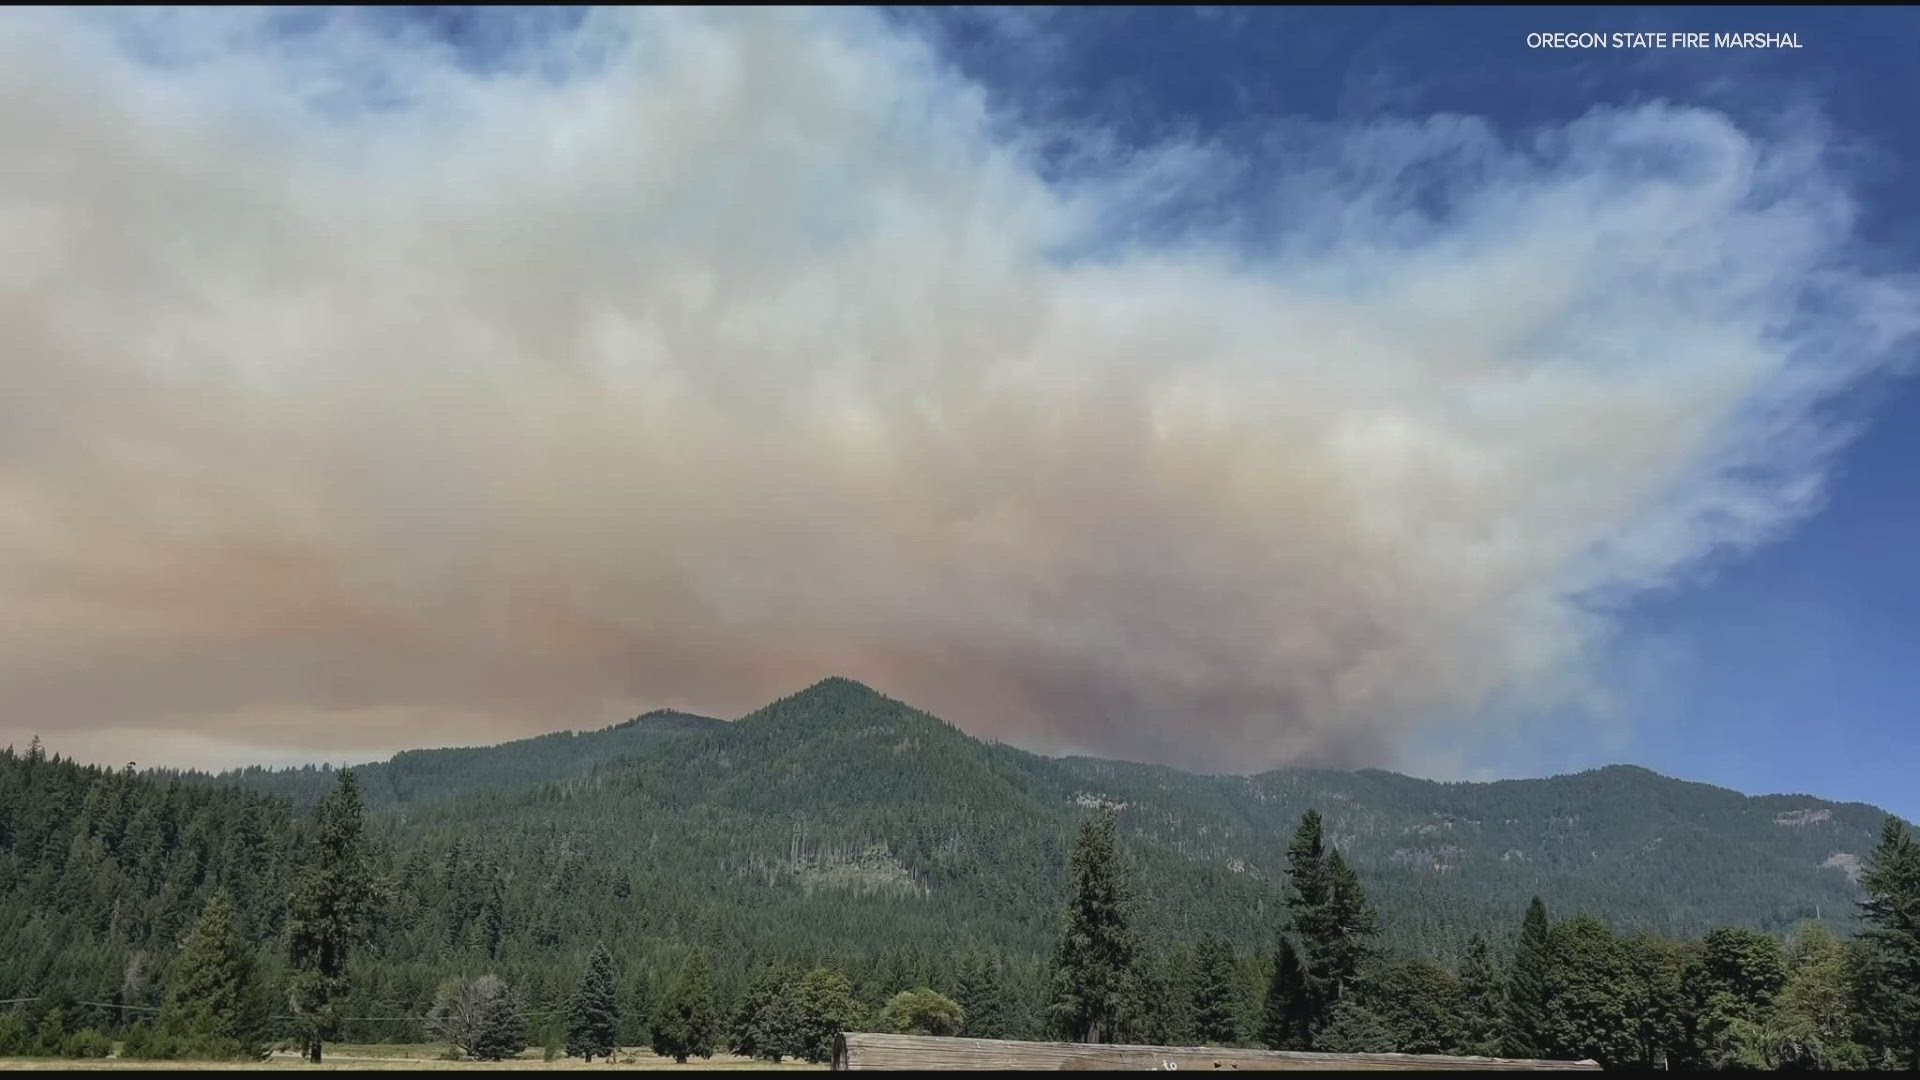 The Lookout Fire is burning in the Cascade foothills of Lane County. Oregon's governor has invoked an Emergency Conflagration Act.